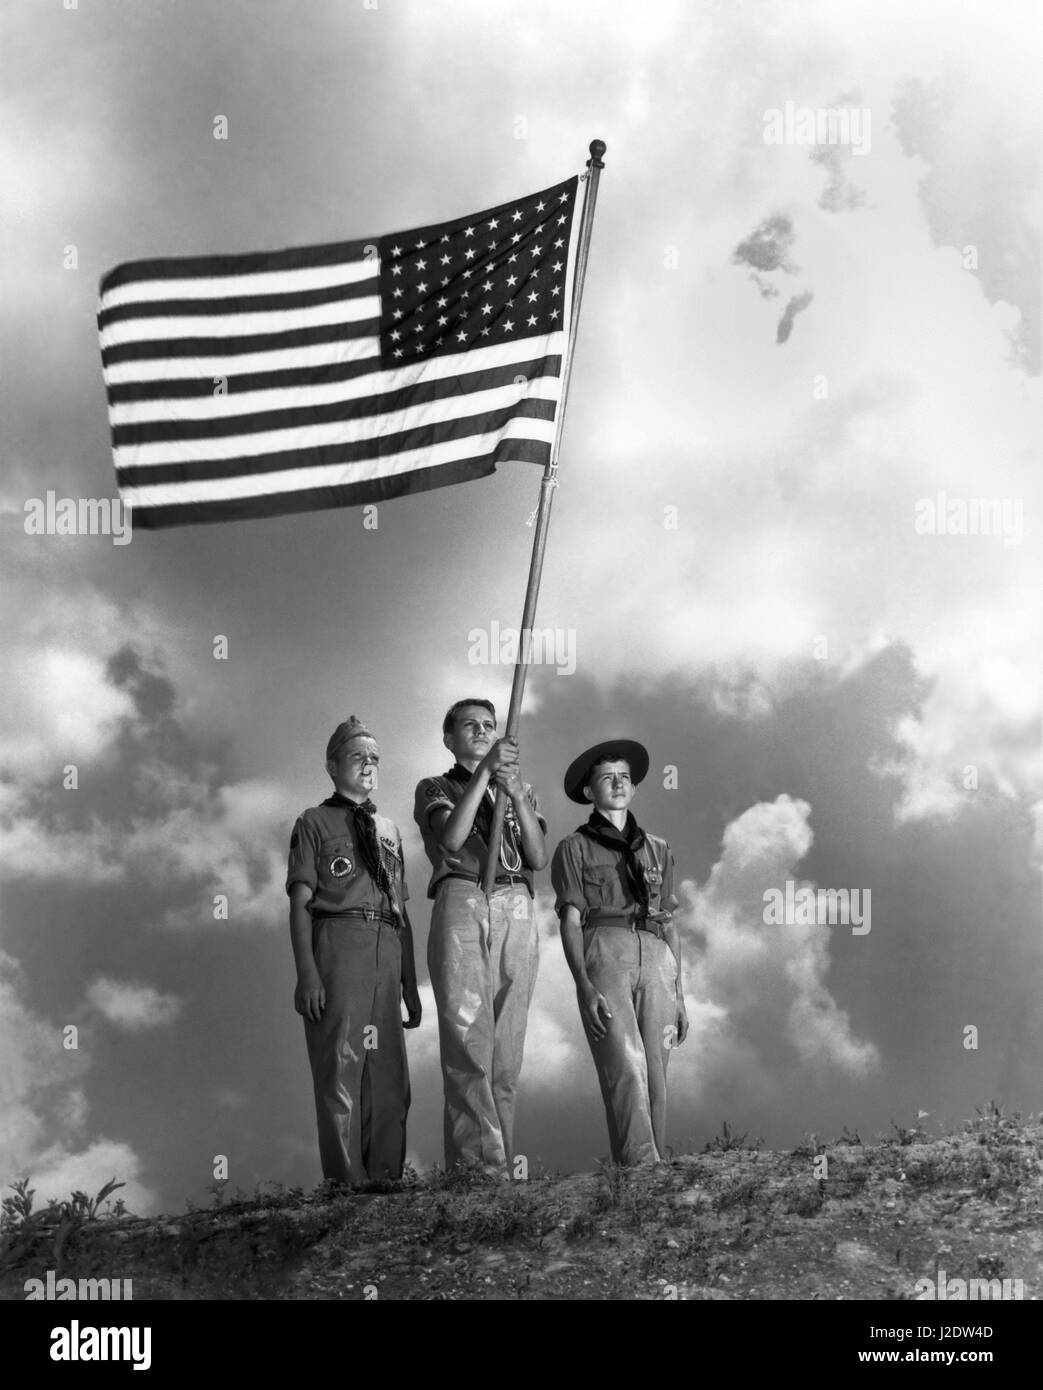 Boy Scouts Henry King, Bill Trimby and Bob Linsay stand with the American flag June 26, 1946 in Oak Ridge,  Tennessee. Oak Ridge was the site of the Clinton Engineer Works where the Manhattan Project to make an atomic bomb was based during WWII. Stock Photo